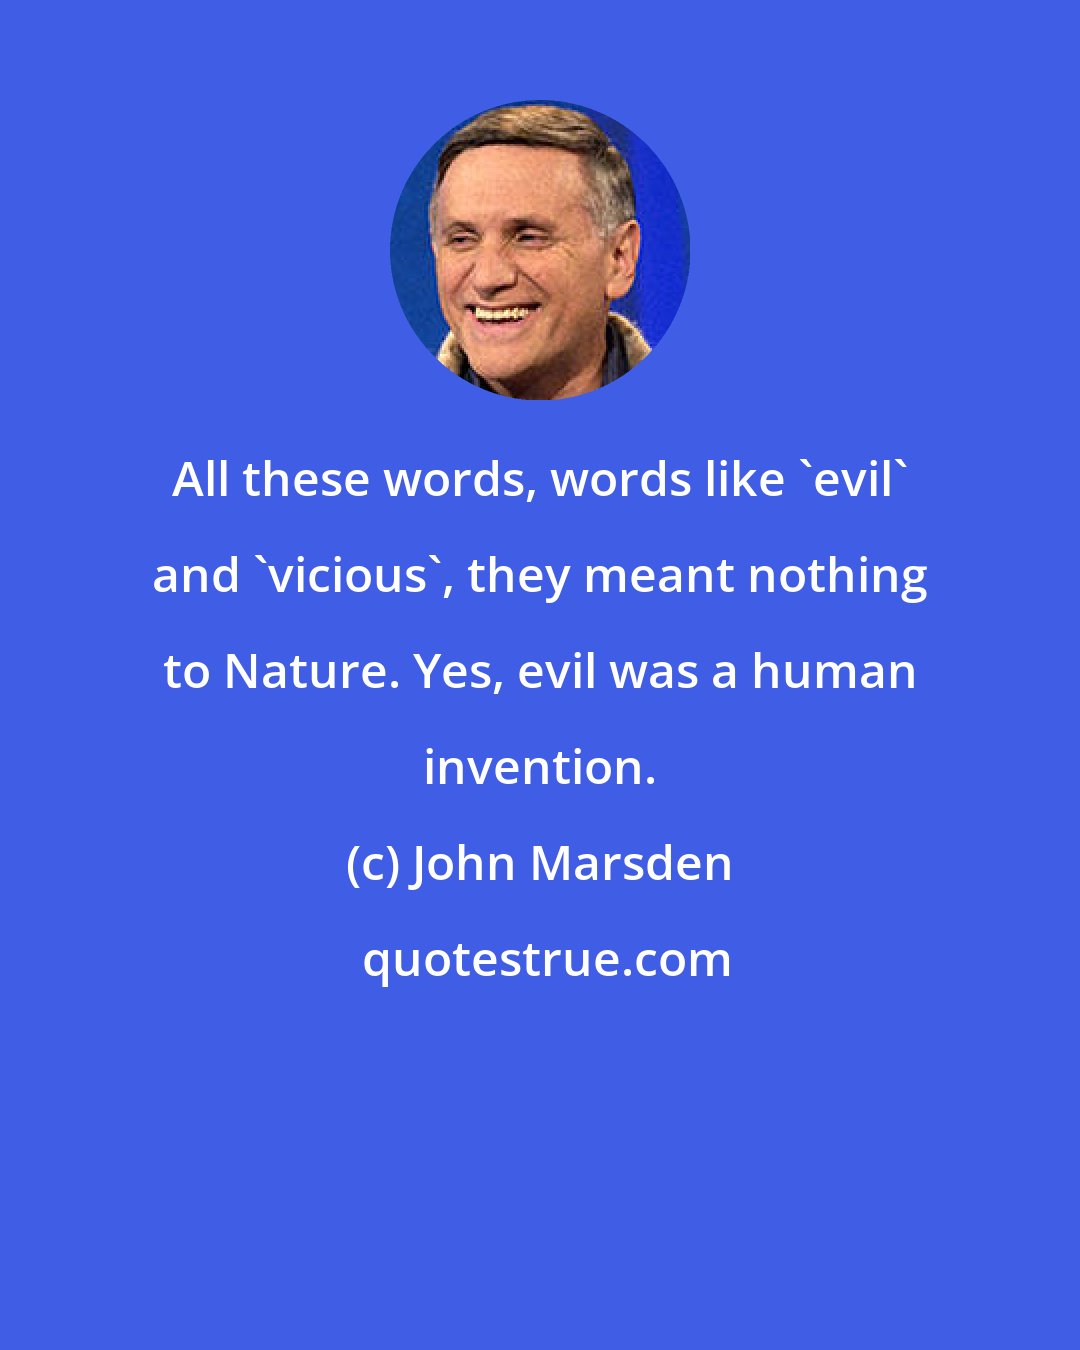 John Marsden: All these words, words like 'evil' and 'vicious', they meant nothing to Nature. Yes, evil was a human invention.